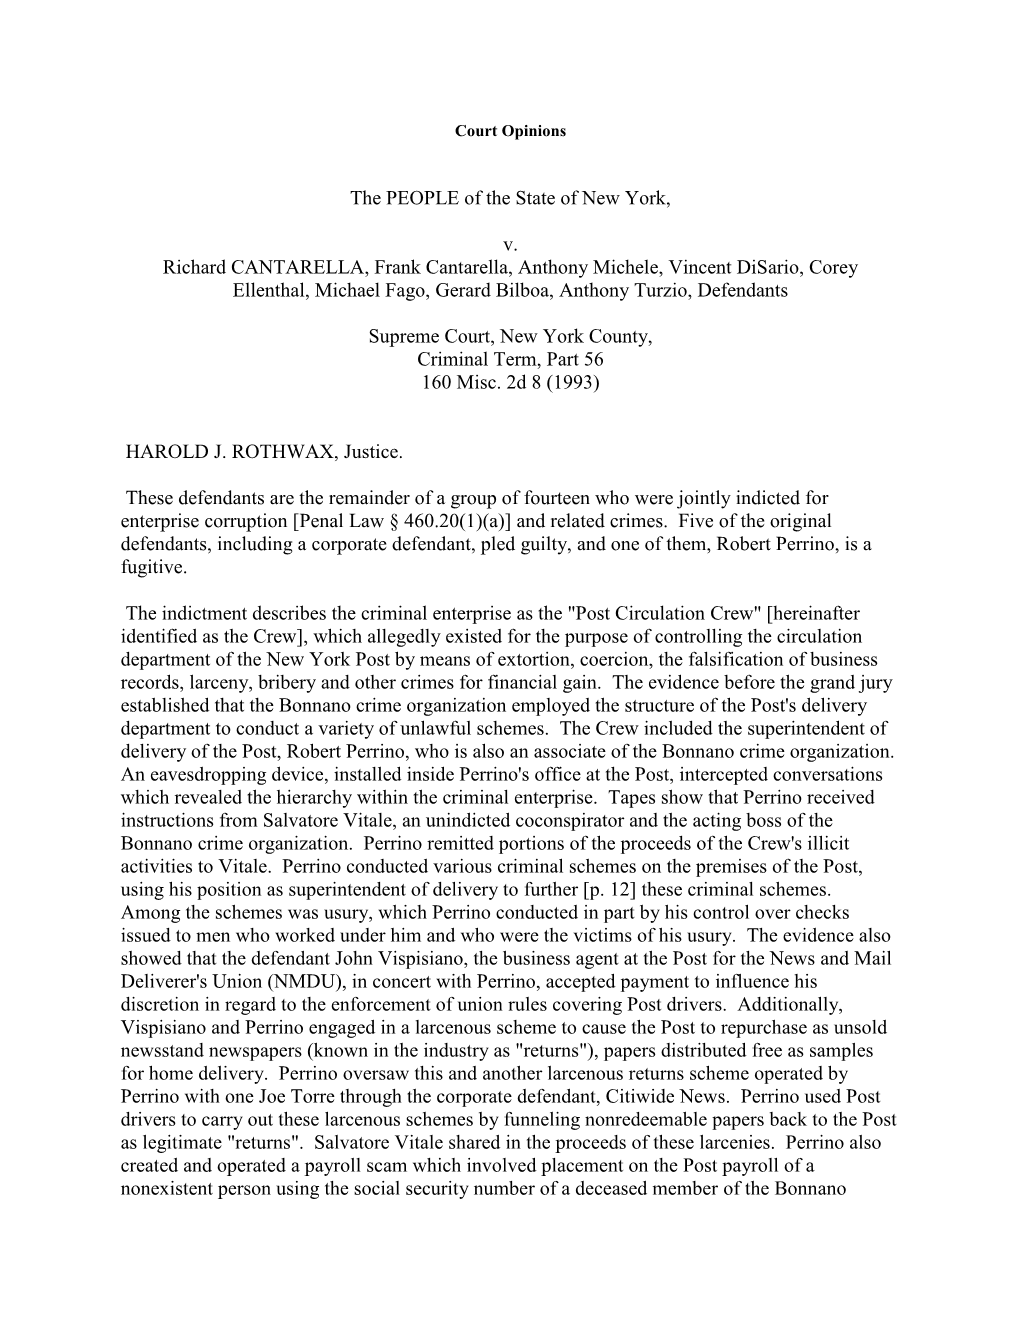 The PEOPLE of the State of New York, V. Richard CANTARELLA